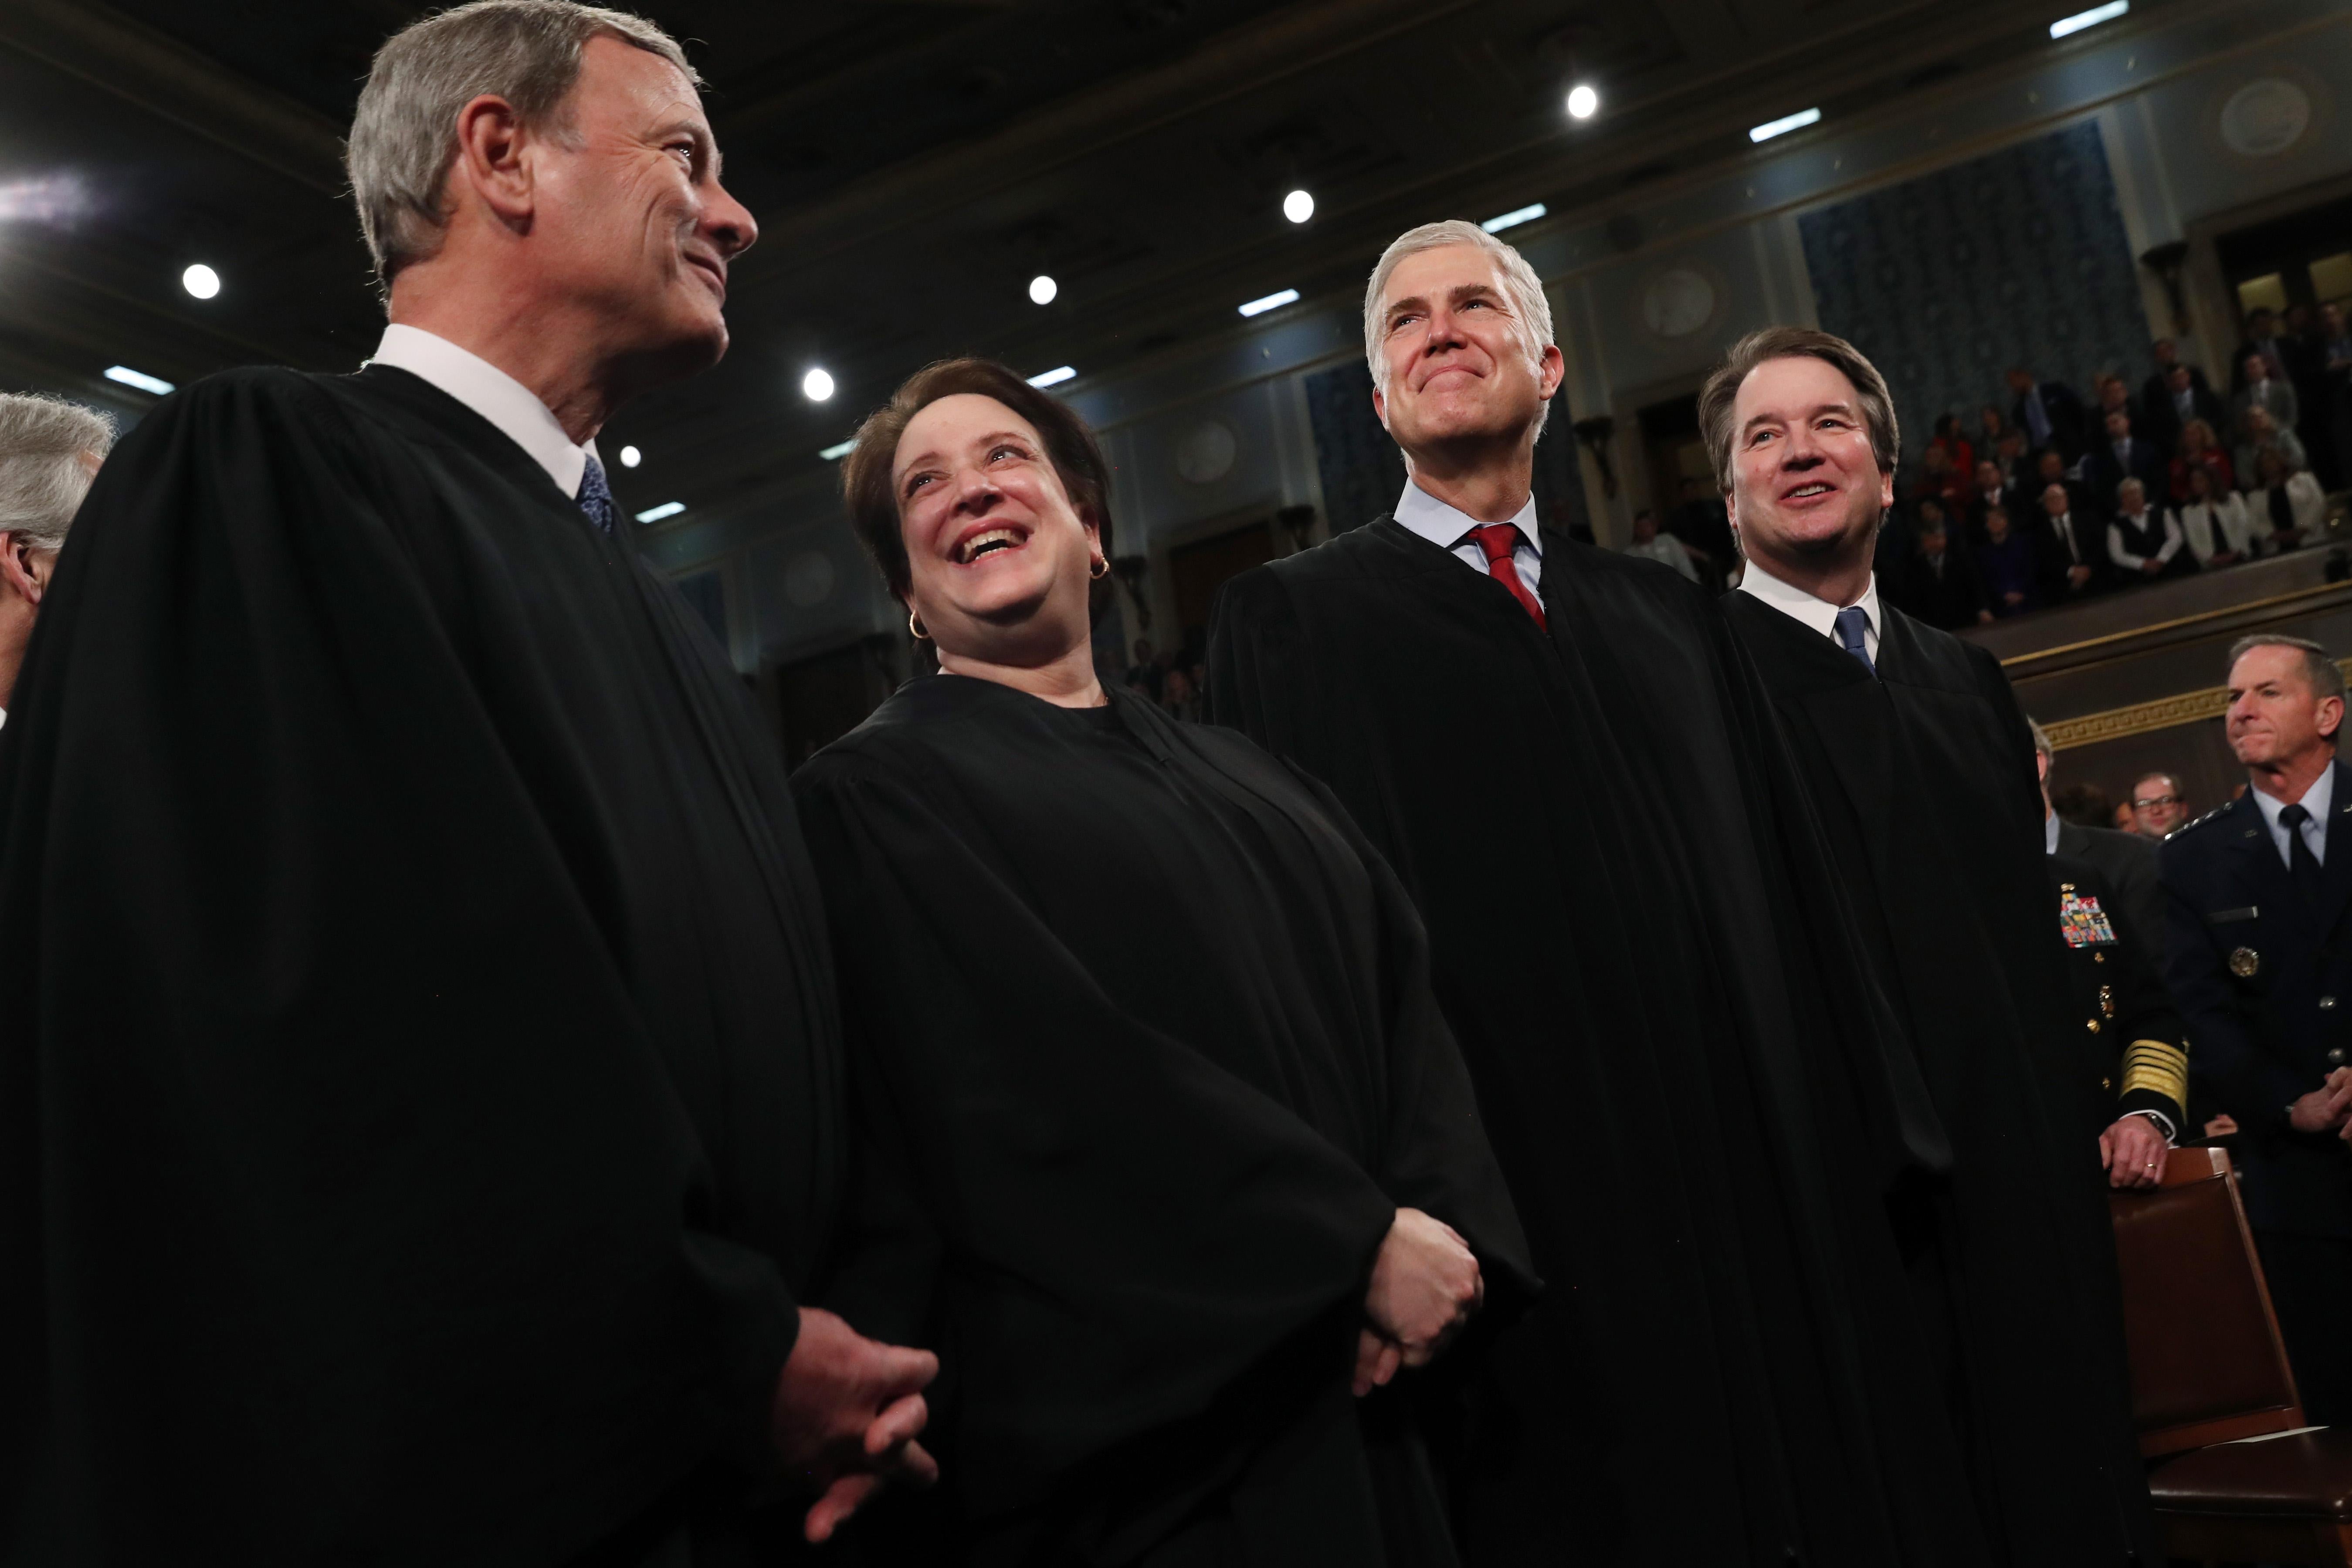 The four justices stand in a row, smiling